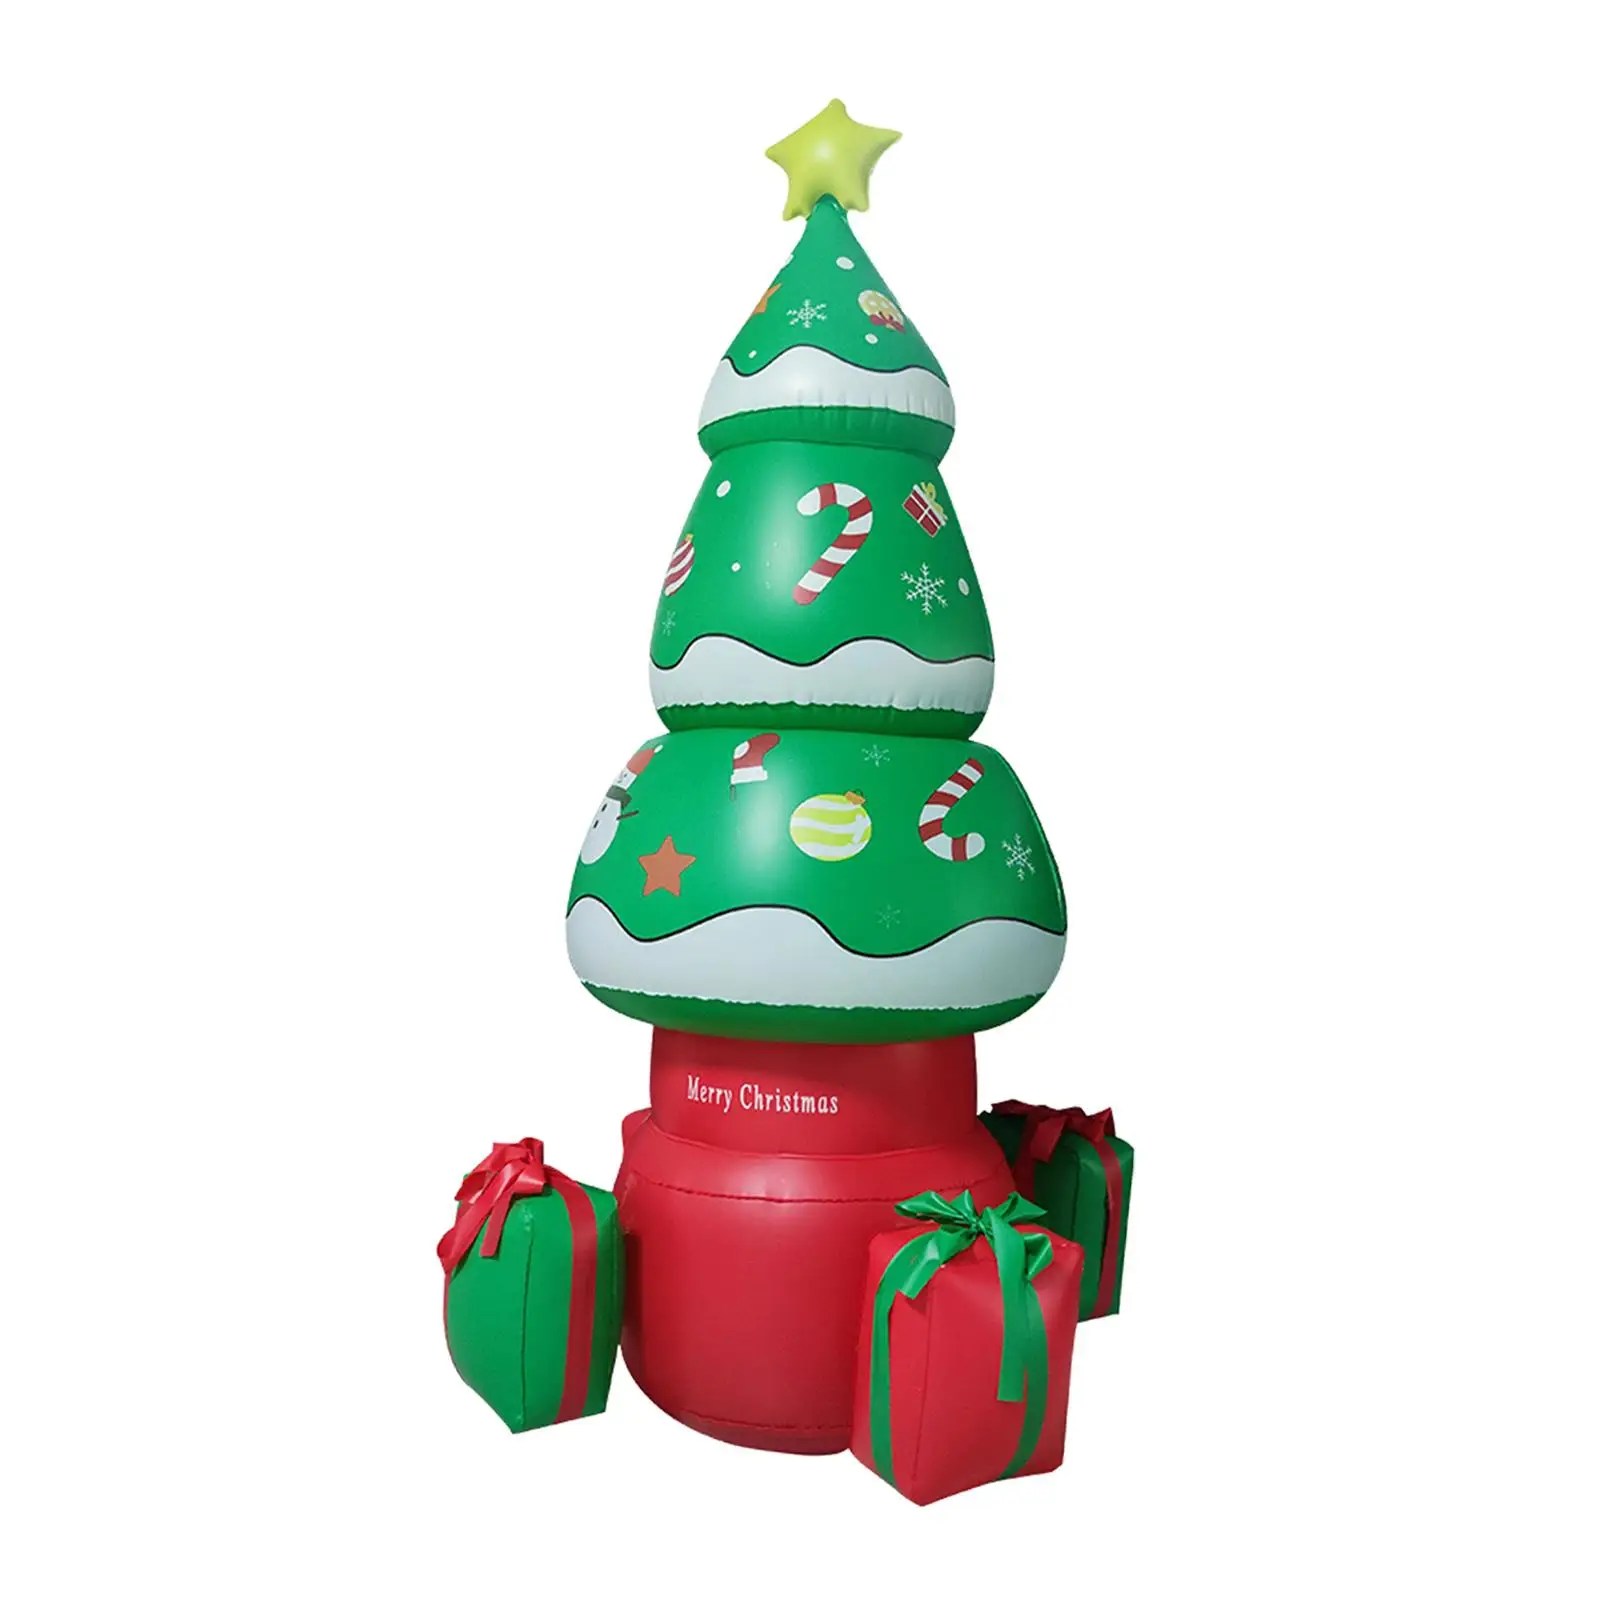 5.6ft Inflatable Christmas Tree Lighted Bright LED Xmas Tree Decorative Tree for Garden Holiday Lawn Outdoor Decor